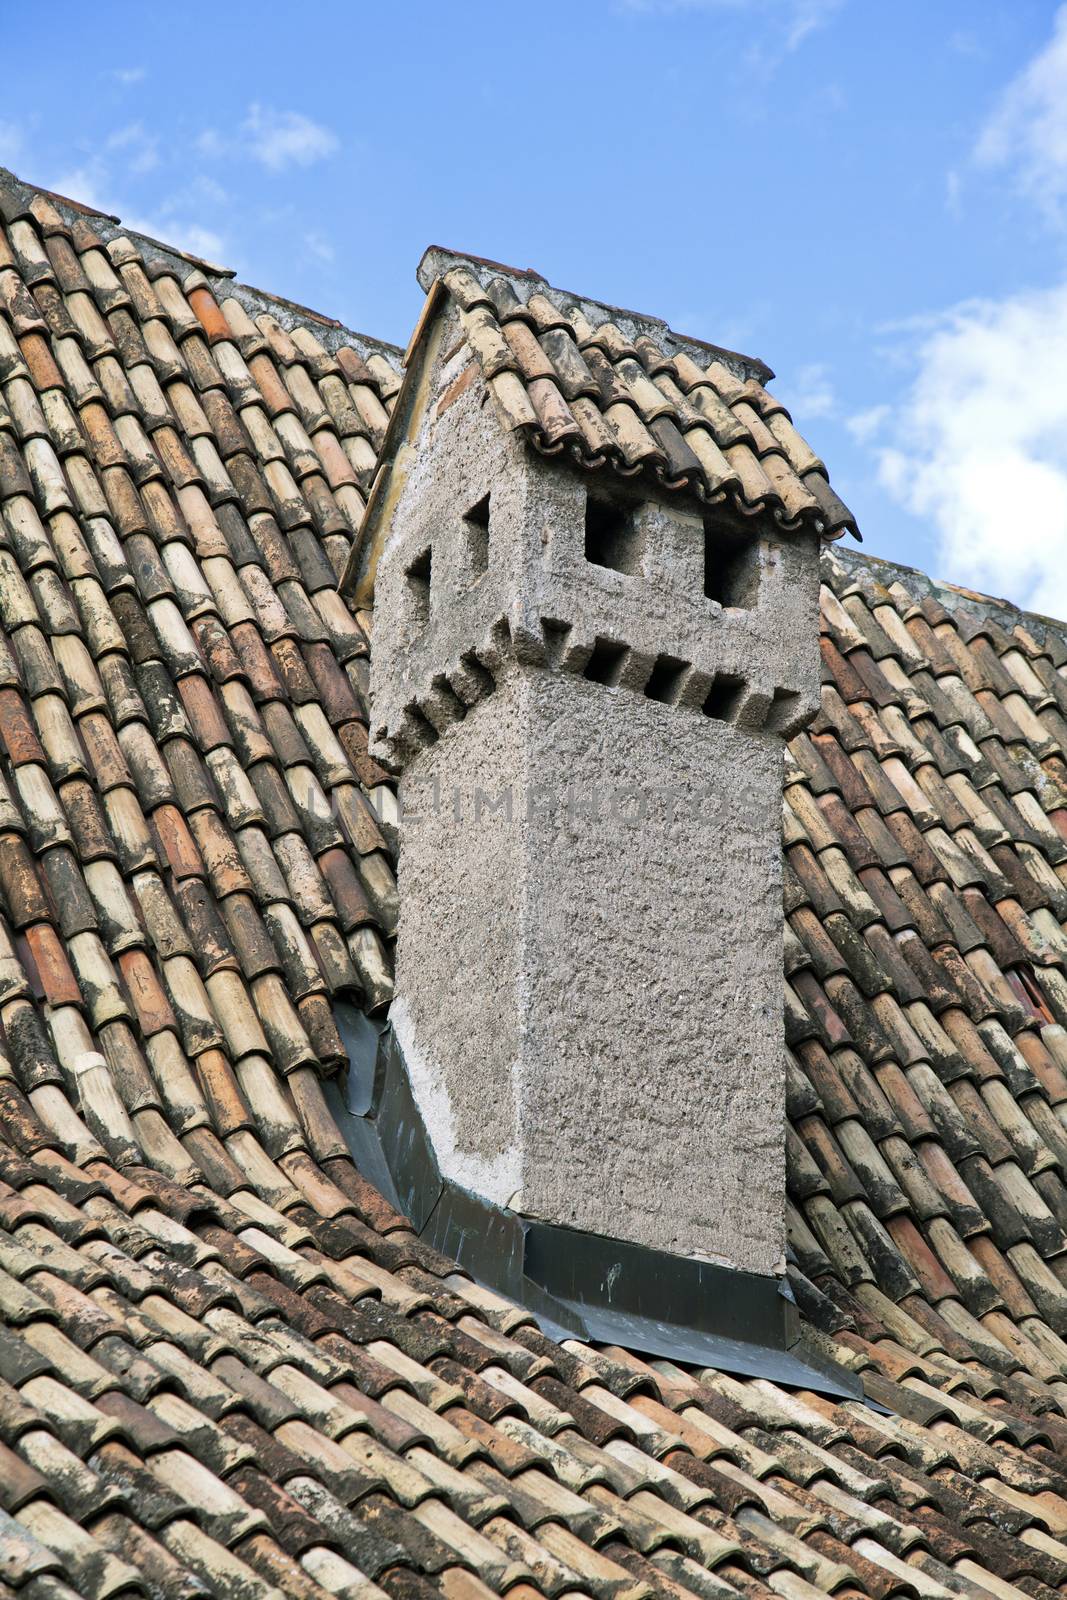 Chimney on a roof of an old residential house